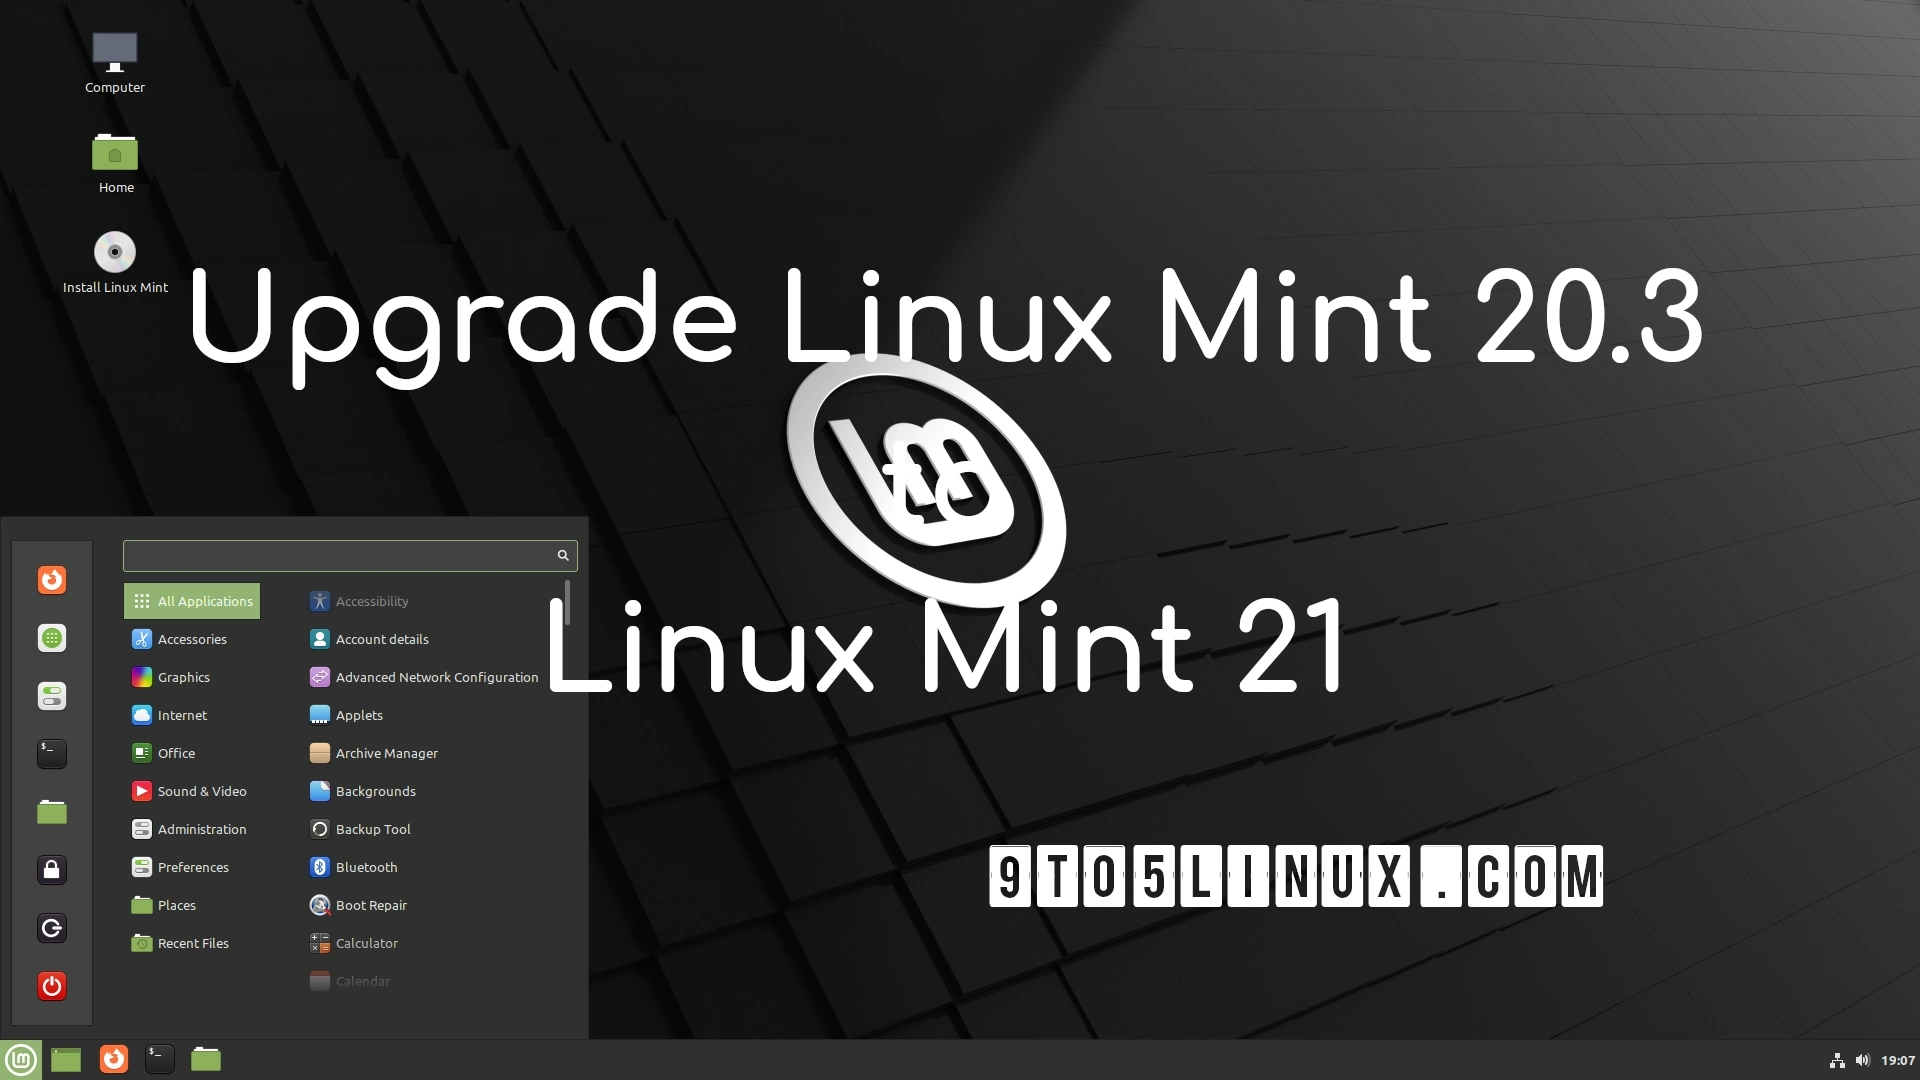 Linux Mint 20.3 Users Can Now Upgrade to Linux Mint 21, Here’s How